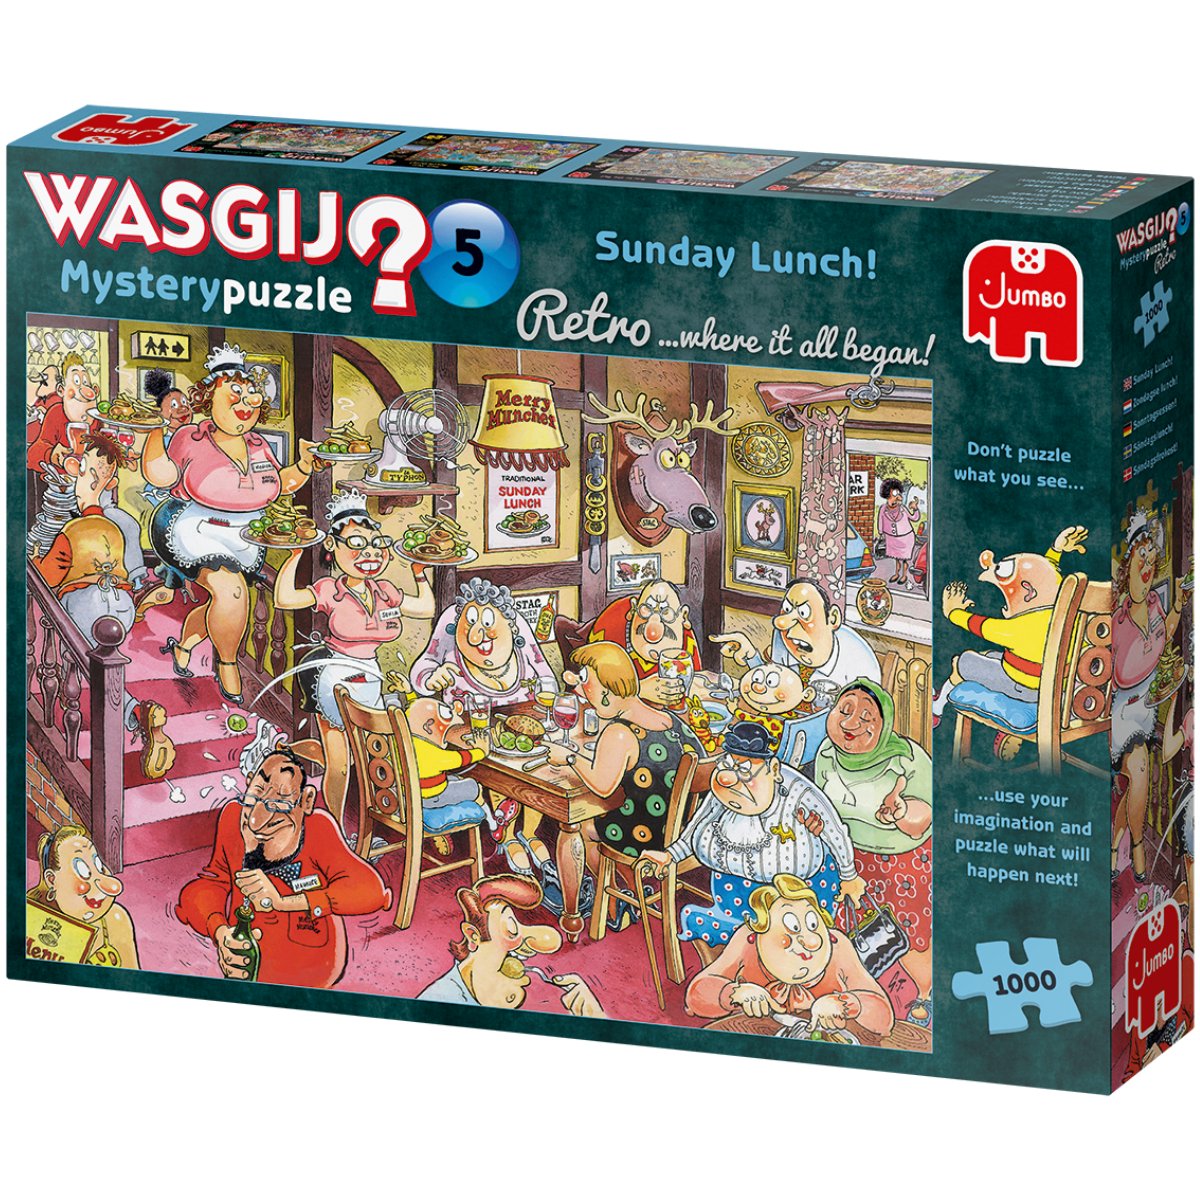 Wasgij Retro Mystery 5 Sunday Lunch! Jigsaw Puzzle (1000 Pieces) - Phillips Hobbies